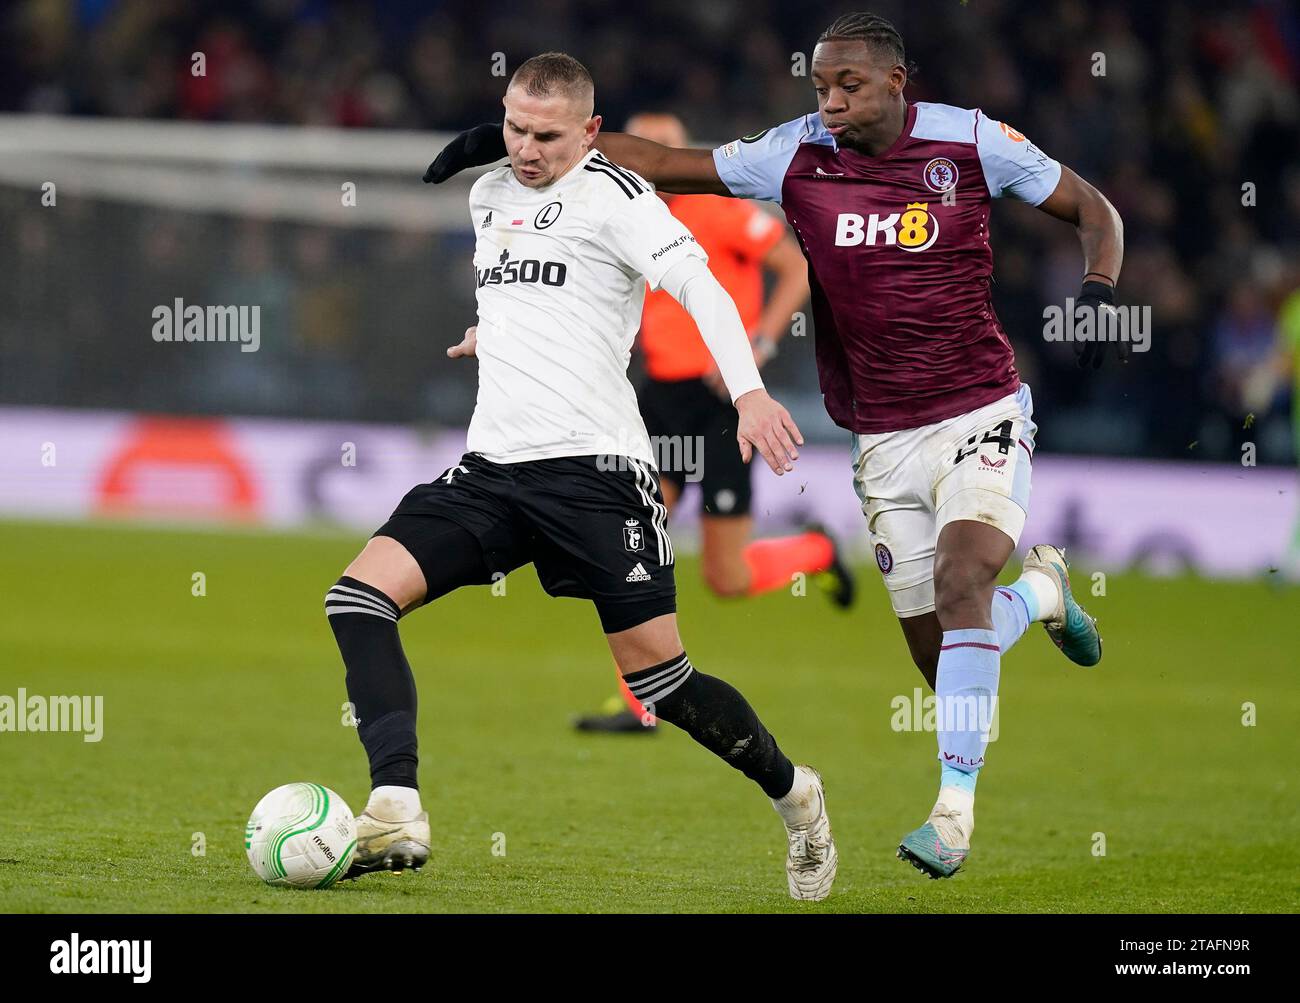 Birmingham, UK. 30th Nov, 2023. Artur Jędrzejczyk of Legia Warsaw (L) is challenged by Jhon Duran of Aston Villa during the UEFA Europa Conference League match at Villa Park, Birmingham. Picture credit should read: Andrew Yates/Sportimage Credit: Sportimage Ltd/Alamy Live News Stock Photo